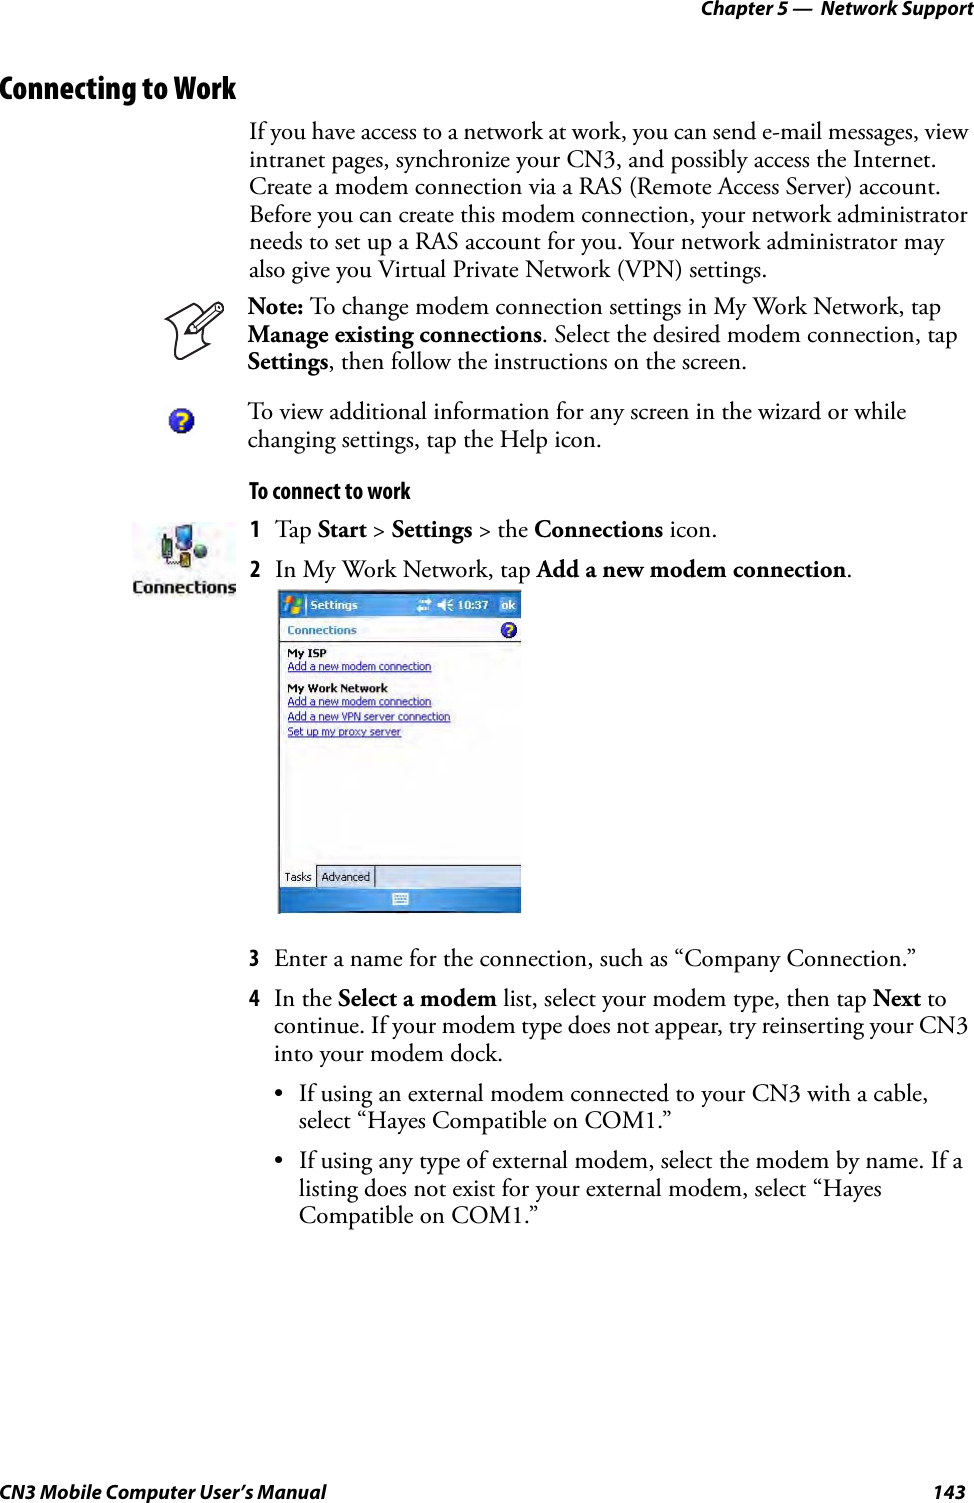 Chapter 5 —  Network SupportCN3 Mobile Computer User’s Manual 143Connecting to WorkIf you have access to a network at work, you can send e-mail messages, view intranet pages, synchronize your CN3, and possibly access the Internet. Create a modem connection via a RAS (Remote Access Server) account. Before you can create this modem connection, your network administrator needs to set up a RAS account for you. Your network administrator may also give you Virtual Private Network (VPN) settings.To connect to work3Enter a name for the connection, such as “Company Connection.” 4In the Select a modem list, select your modem type, then tap Next to continue. If your modem type does not appear, try reinserting your CN3 into your modem dock.• If using an external modem connected to your CN3 with a cable, select “Hayes Compatible on COM1.”• If using any type of external modem, select the modem by name. If a listing does not exist for your external modem, select “Hayes Compatible on COM1.”Note: To change modem connection settings in My Work Network, tap Manage existing connections. Select the desired modem connection, tap Settings, then follow the instructions on the screen.To view additional information for any screen in the wizard or while changing settings, tap the Help icon.1Tap Start &gt; Settings &gt; the Connections icon. 2In My Work Network, tap Add a new modem connection.